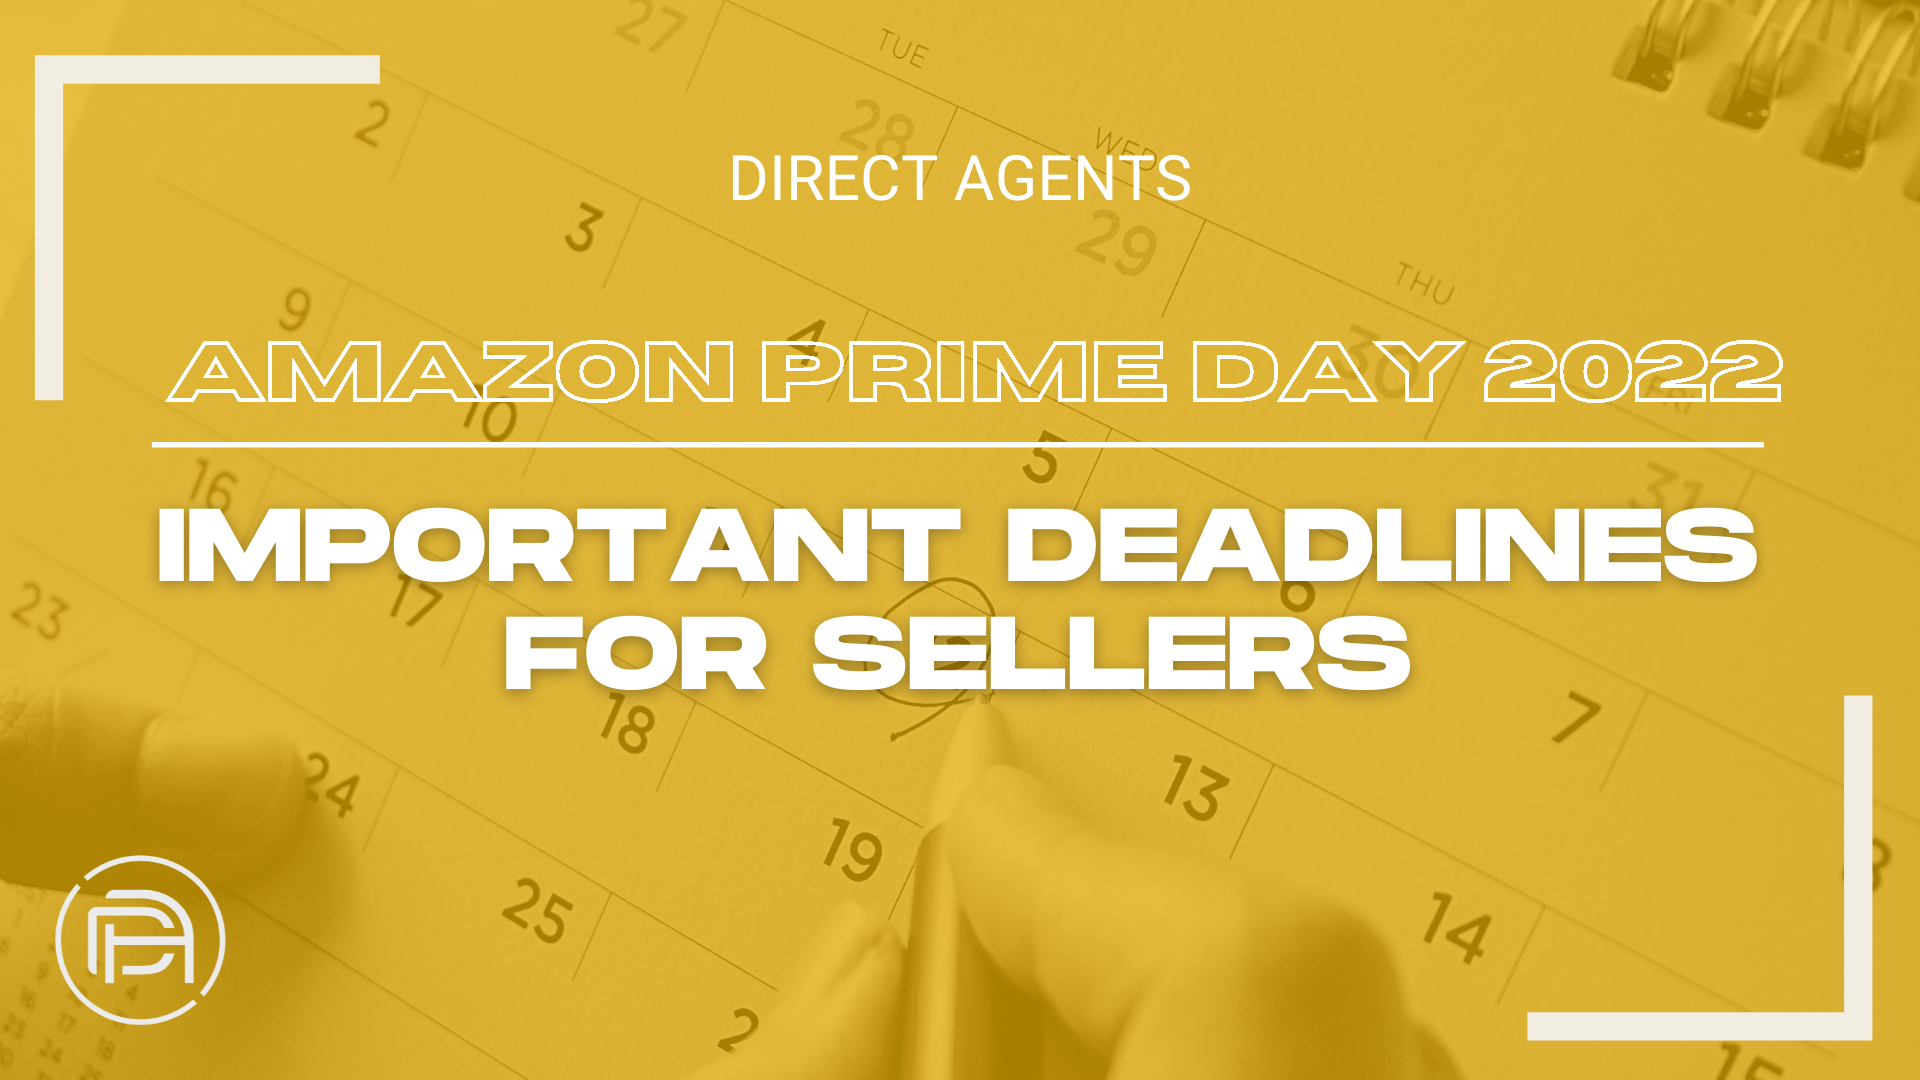 Amazon Prime Day 2022: Important Deadlines for Sellers